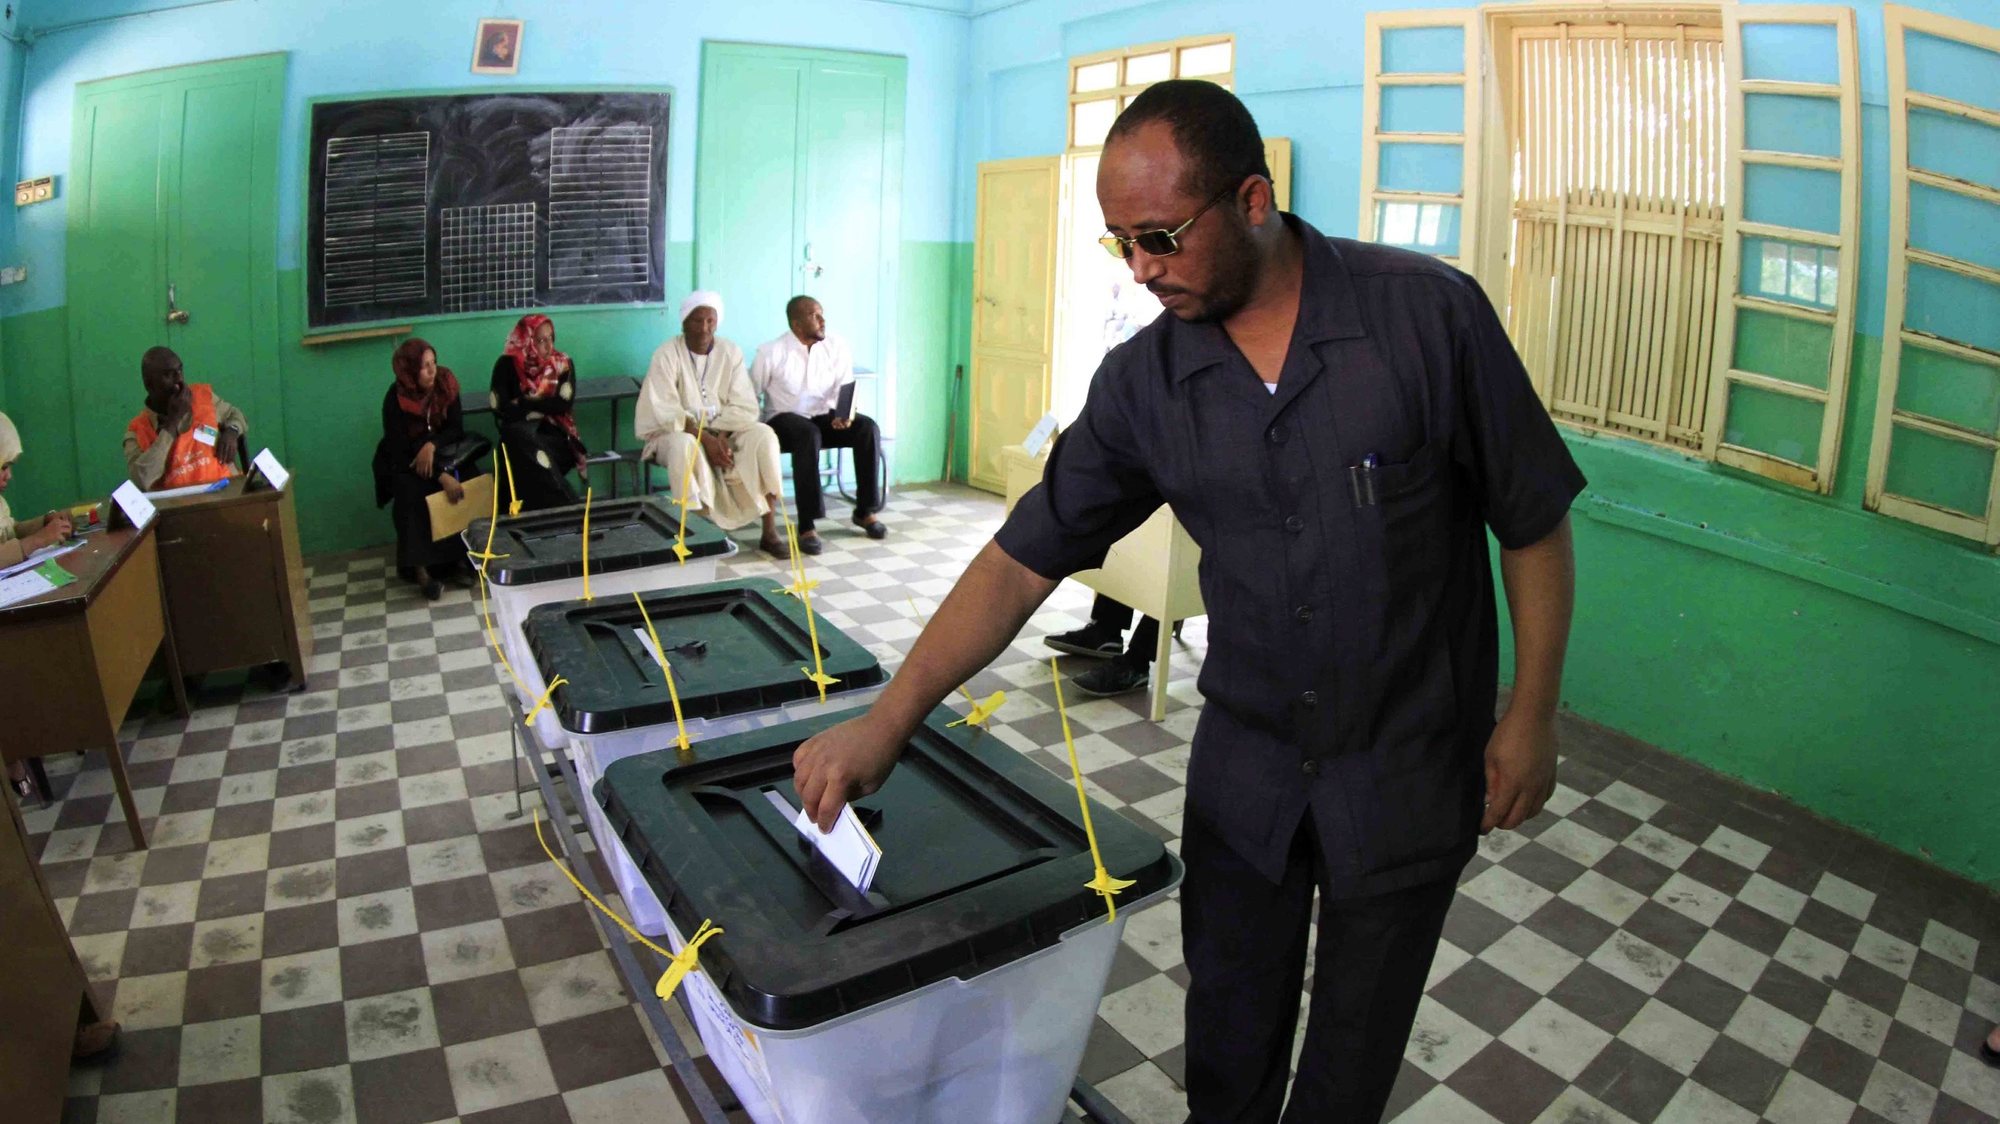 epa04703006 A Sudanese man casts his vote in the country&#039;s Presidential and National Assembly elections, at the St. Francis primary school in Khartoum, Sudan, 13 April 2015. Incumbent Sudanese President, Omar al-Bashir, who has been in power for over a quarter of a century since a 1989 coup, is effectively running unopposed in the 13-15 April elections, due to a boycott by the main opposition parties complaining of political repression, and although there are 17 lesser known candidates, 71 year old al-Bashir is widely believed to be in a good position to win.  EPA/MARWAN ALI